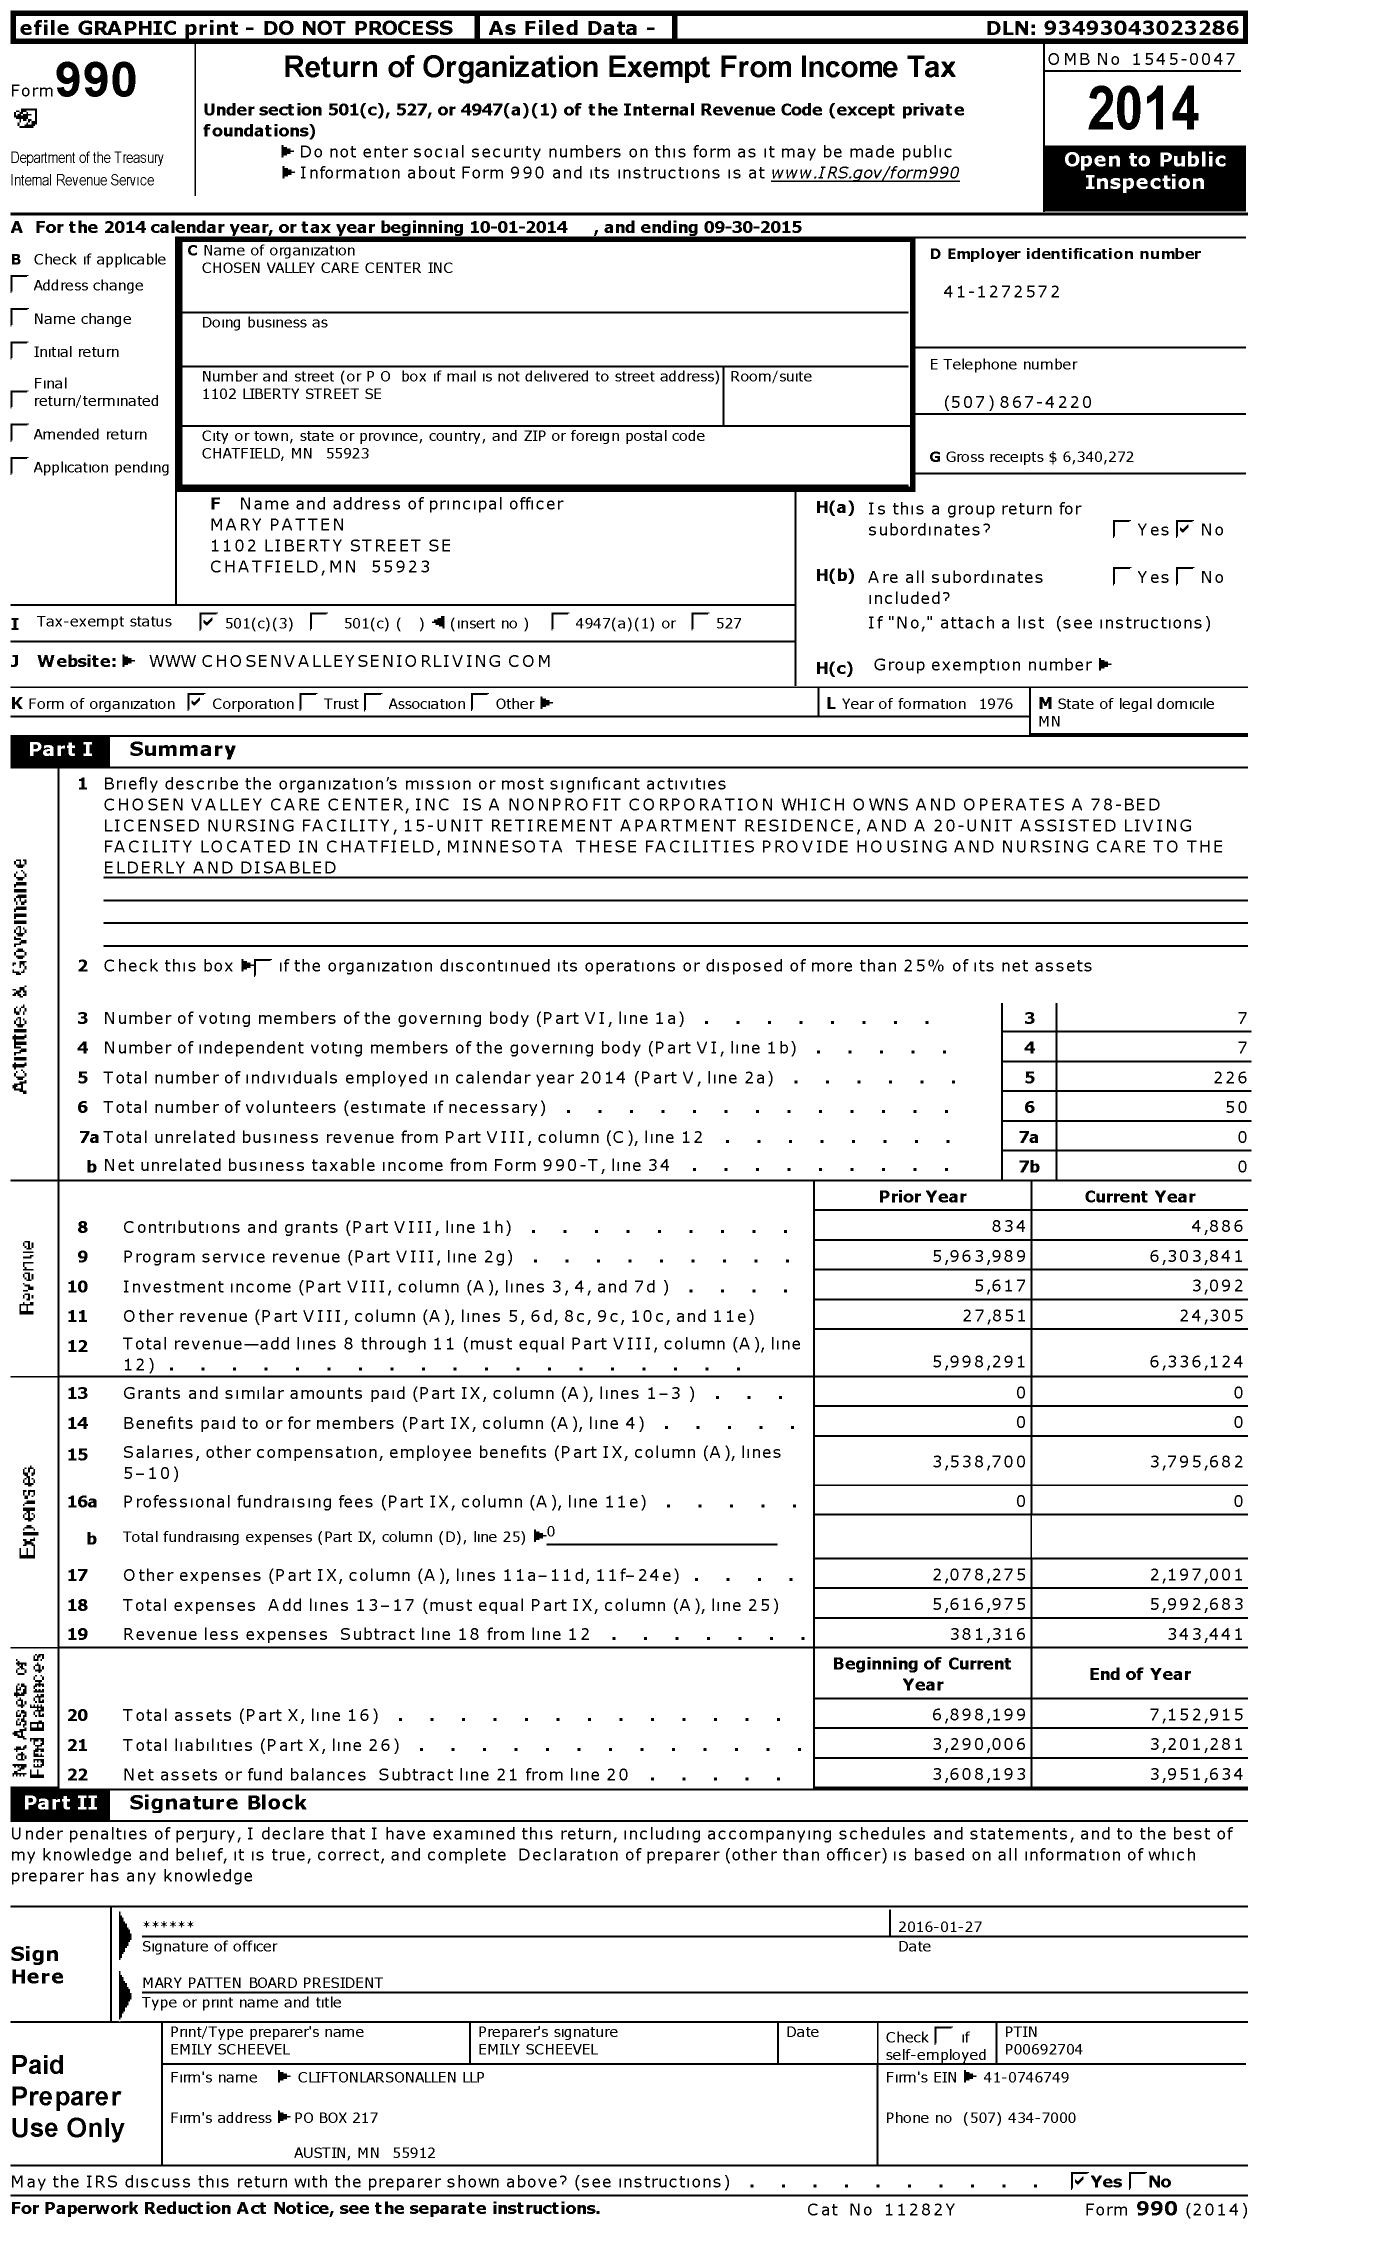 Image of first page of 2014 Form 990 for Chosen Valley Care Center